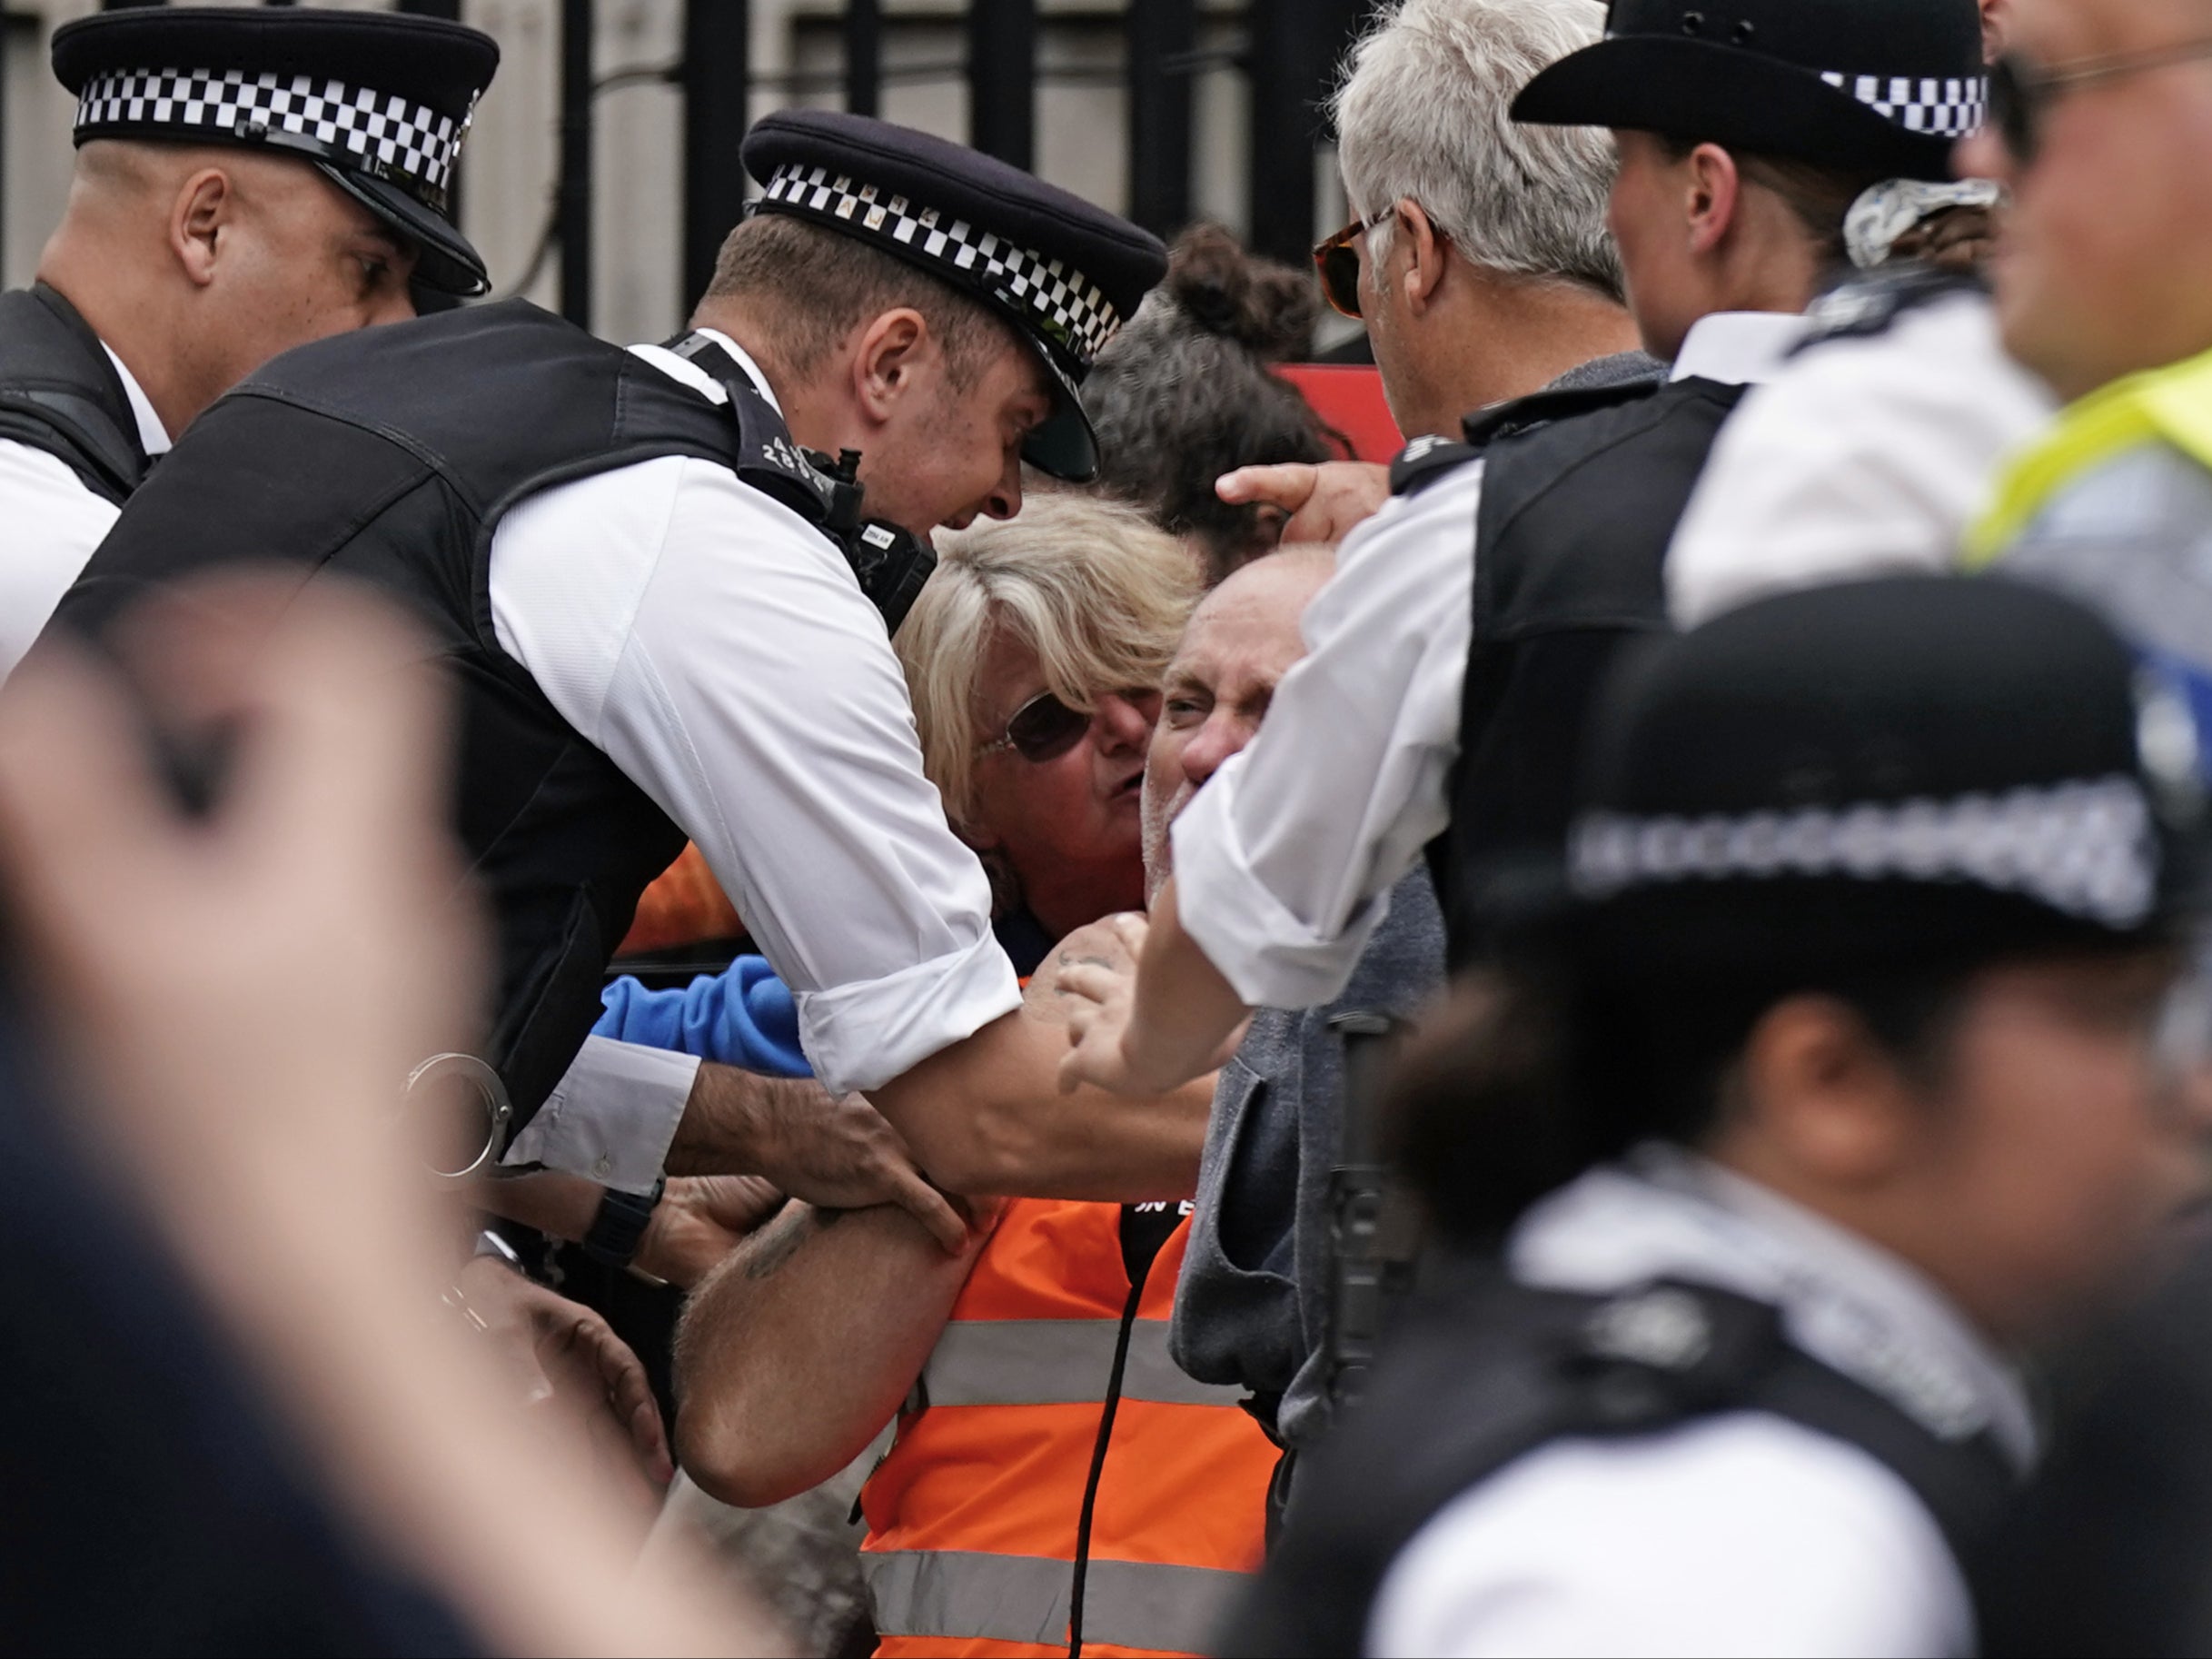 Police officers restrain an anti-Ulez protester outside Downing Street